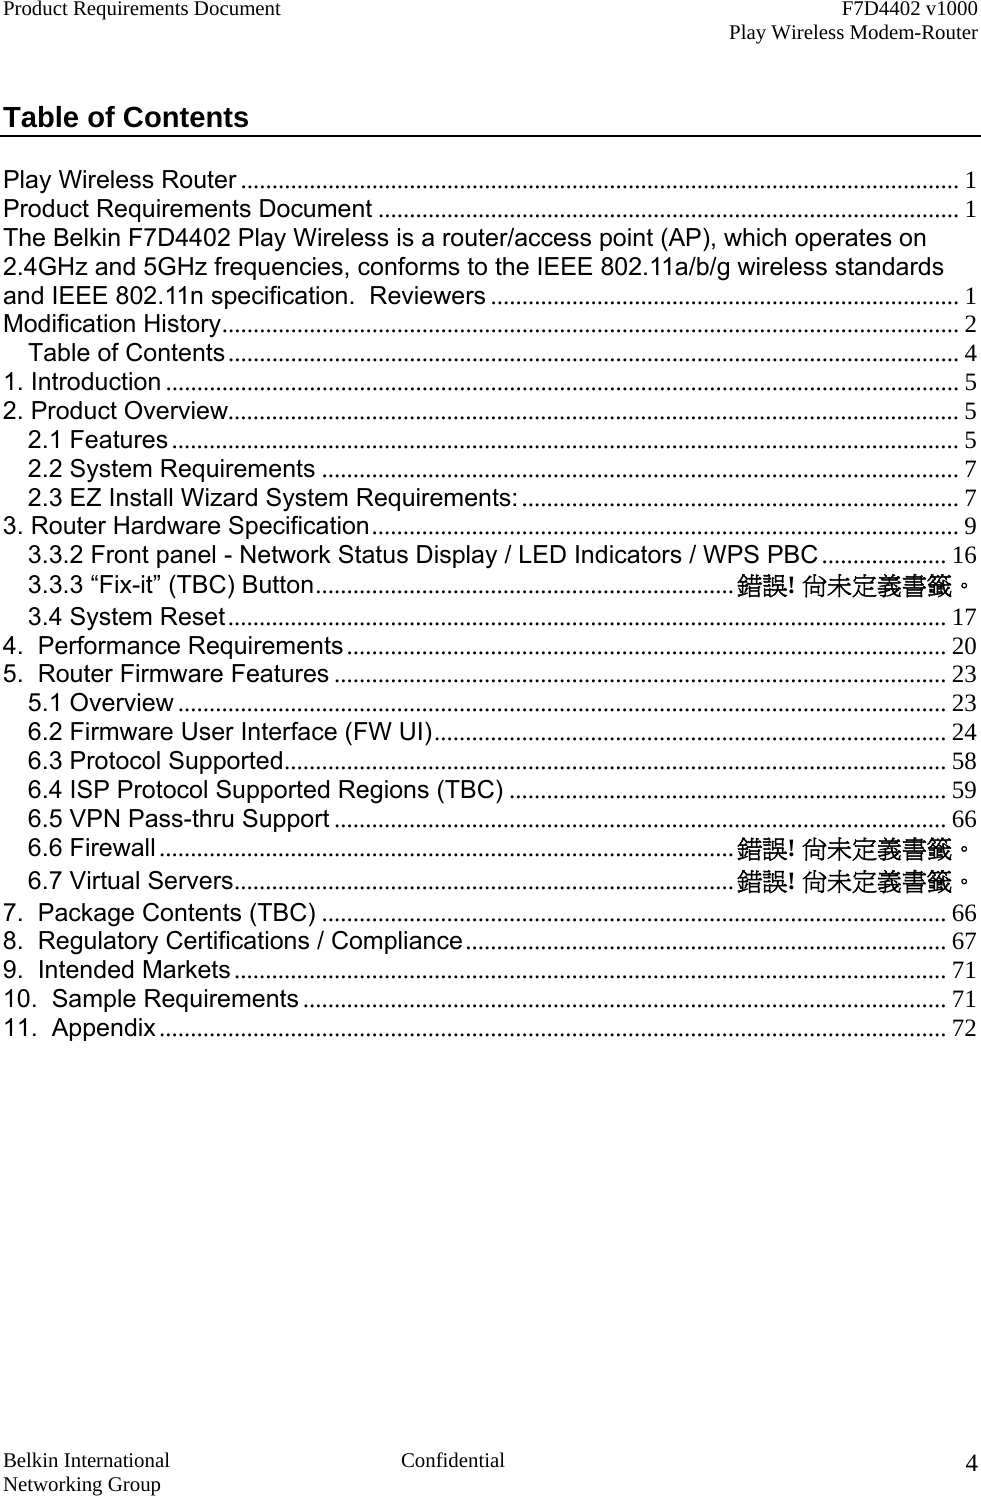 Product Requirements Document    F7D4402 v1000     Play Wireless Modem-Router  Belkin International  Confidential Networking Group 4 Table of Contents  Play Wireless Router ................................................................................................................... 1 Product Requirements Document ............................................................................................. 1 The Belkin F7D4402 Play Wireless is a router/access point (AP), which operates on 2.4GHz and 5GHz frequencies, conforms to the IEEE 802.11a/b/g wireless standards and IEEE 802.11n specification.  Reviewers ........................................................................... 1 Modification History...................................................................................................................... 2 Table of Contents..................................................................................................................... 4 1. Introduction ............................................................................................................................... 5 2. Product Overview..................................................................................................................... 5 2.1 Features .............................................................................................................................. 5 2.2 System Requirements ...................................................................................................... 7 2.3 EZ Install Wizard System Requirements: ...................................................................... 7 3. Router Hardware Specification.............................................................................................. 9 3.3.2 Front panel - Network Status Display / LED Indicators / WPS PBC .................... 16 3.3.3 “Fix-it” (TBC) Button...................................................................錯誤! 尚未定義書籤。 3.4 System Reset................................................................................................................... 17 4.  Performance Requirements ................................................................................................ 20 5.  Router Firmware Features .................................................................................................. 23 5.1 Overview ........................................................................................................................... 23 6.2 Firmware User Interface (FW UI).................................................................................. 24 6.3 Protocol Supported.......................................................................................................... 58 6.4 ISP Protocol Supported Regions (TBC) ...................................................................... 59 6.5 VPN Pass-thru Support .................................................................................................. 66 6.6 Firewall ............................................................................................錯誤! 尚未定義書籤。 6.7 Virtual Servers................................................................................錯誤! 尚未定義書籤。 7.  Package Contents (TBC) .................................................................................................... 66 8.  Regulatory Certifications / Compliance............................................................................. 67 9.  Intended Markets .................................................................................................................. 71 10.  Sample Requirements ....................................................................................................... 71 11.  Appendix .............................................................................................................................. 72  